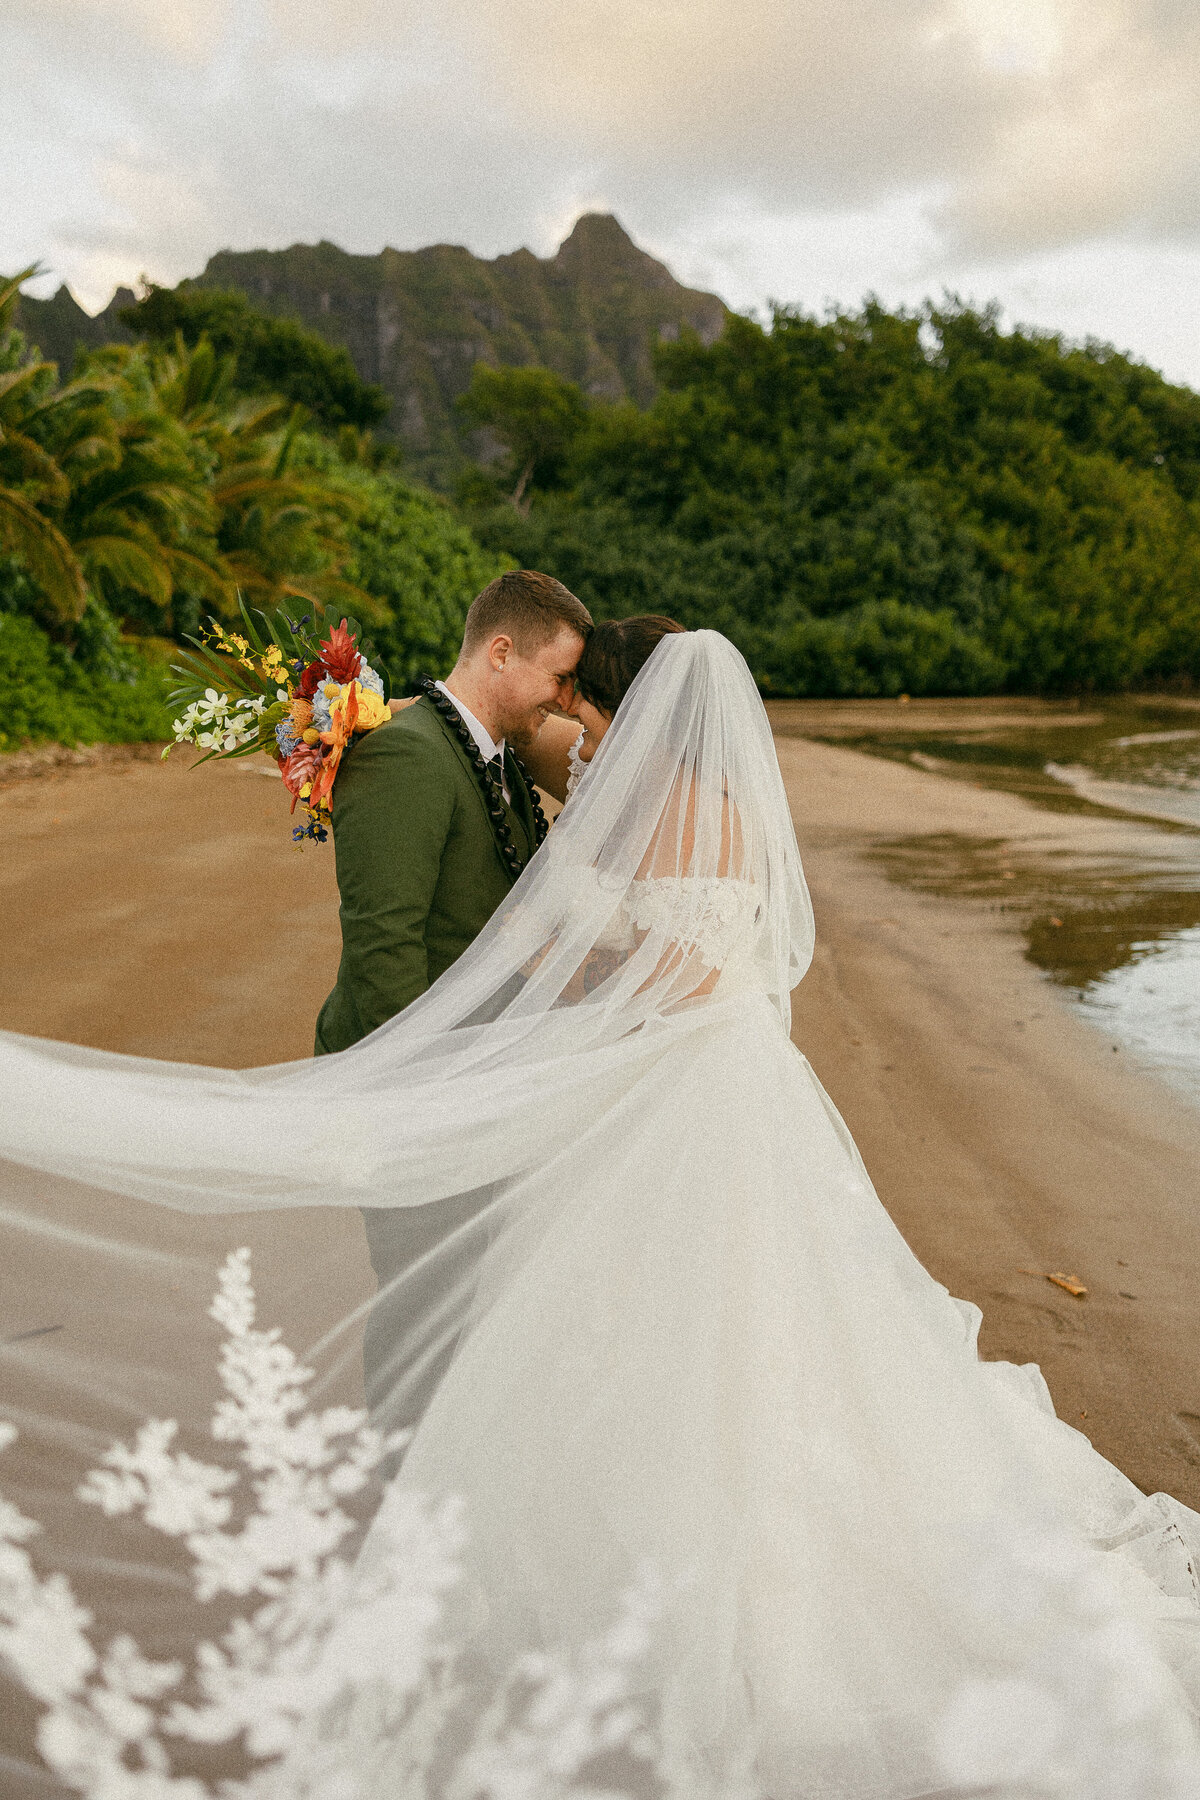 A wedding couple about to kiss as they stand on a sandy beach.